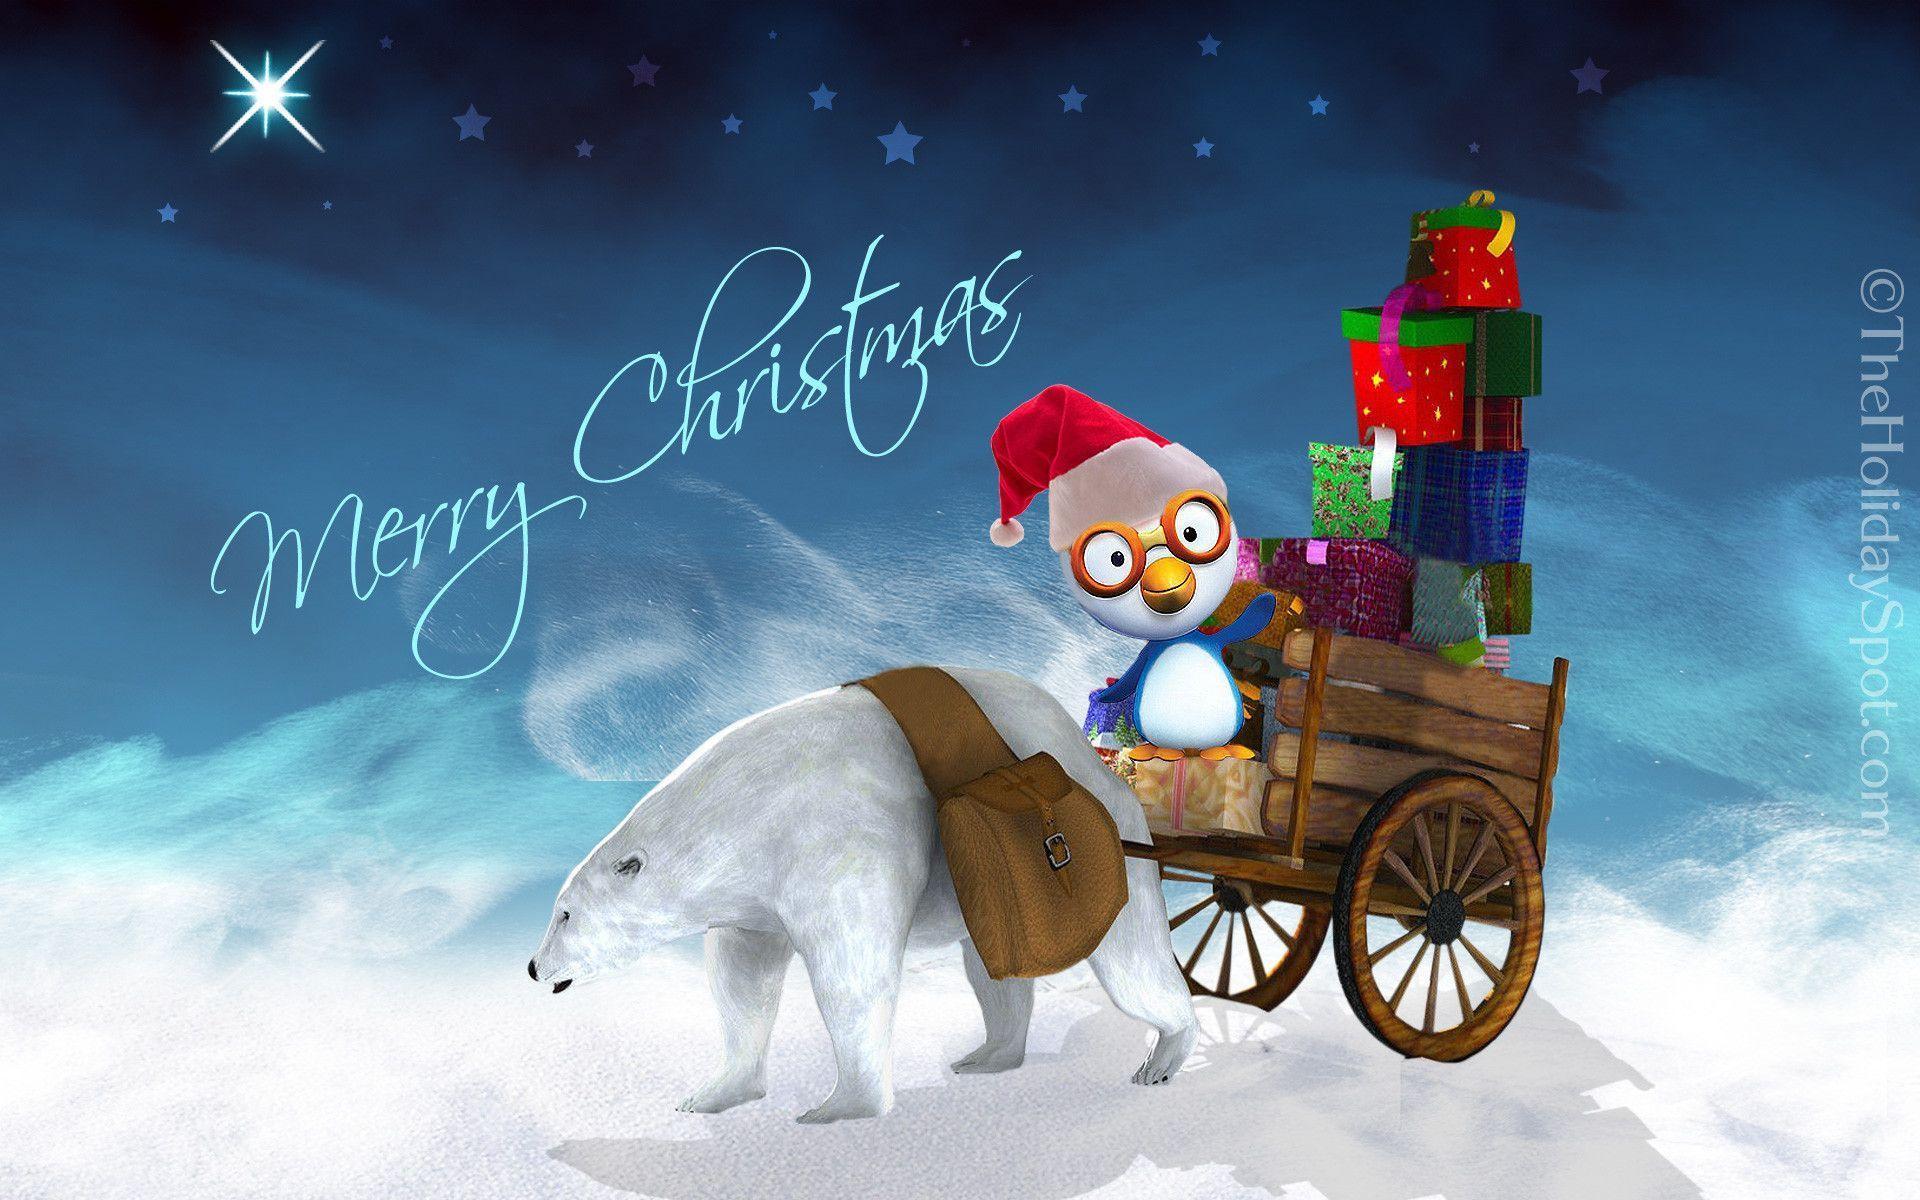 Merry Christmas 2014 Wallpaper, Image, Picture, Photo